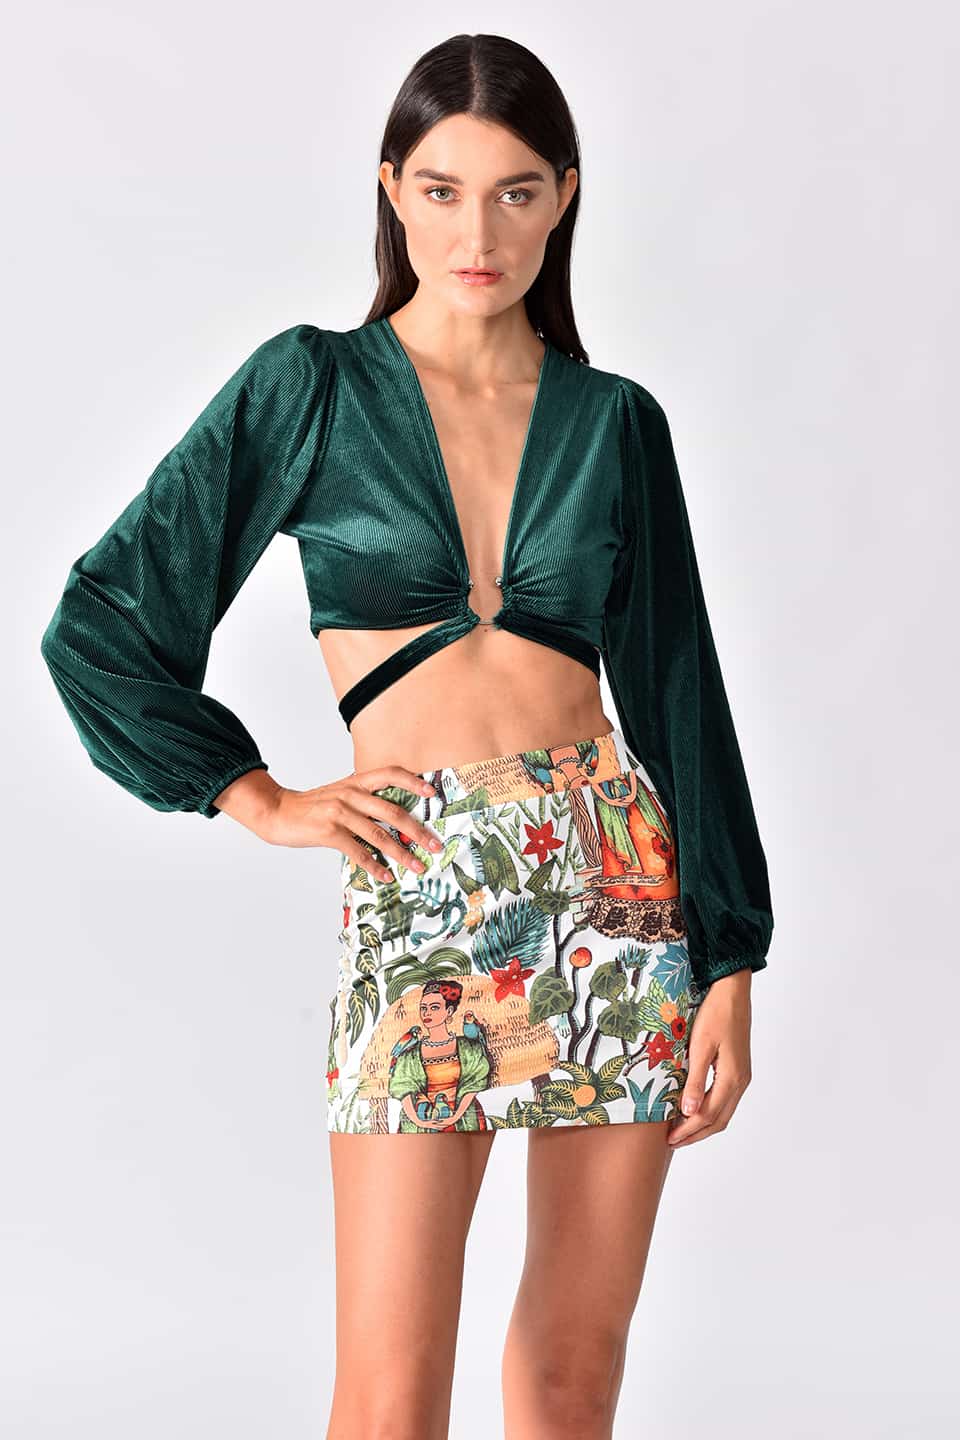 Model in pose for front view, while wearing a set of colorful mini skirt and emerald green top with long sleeves.